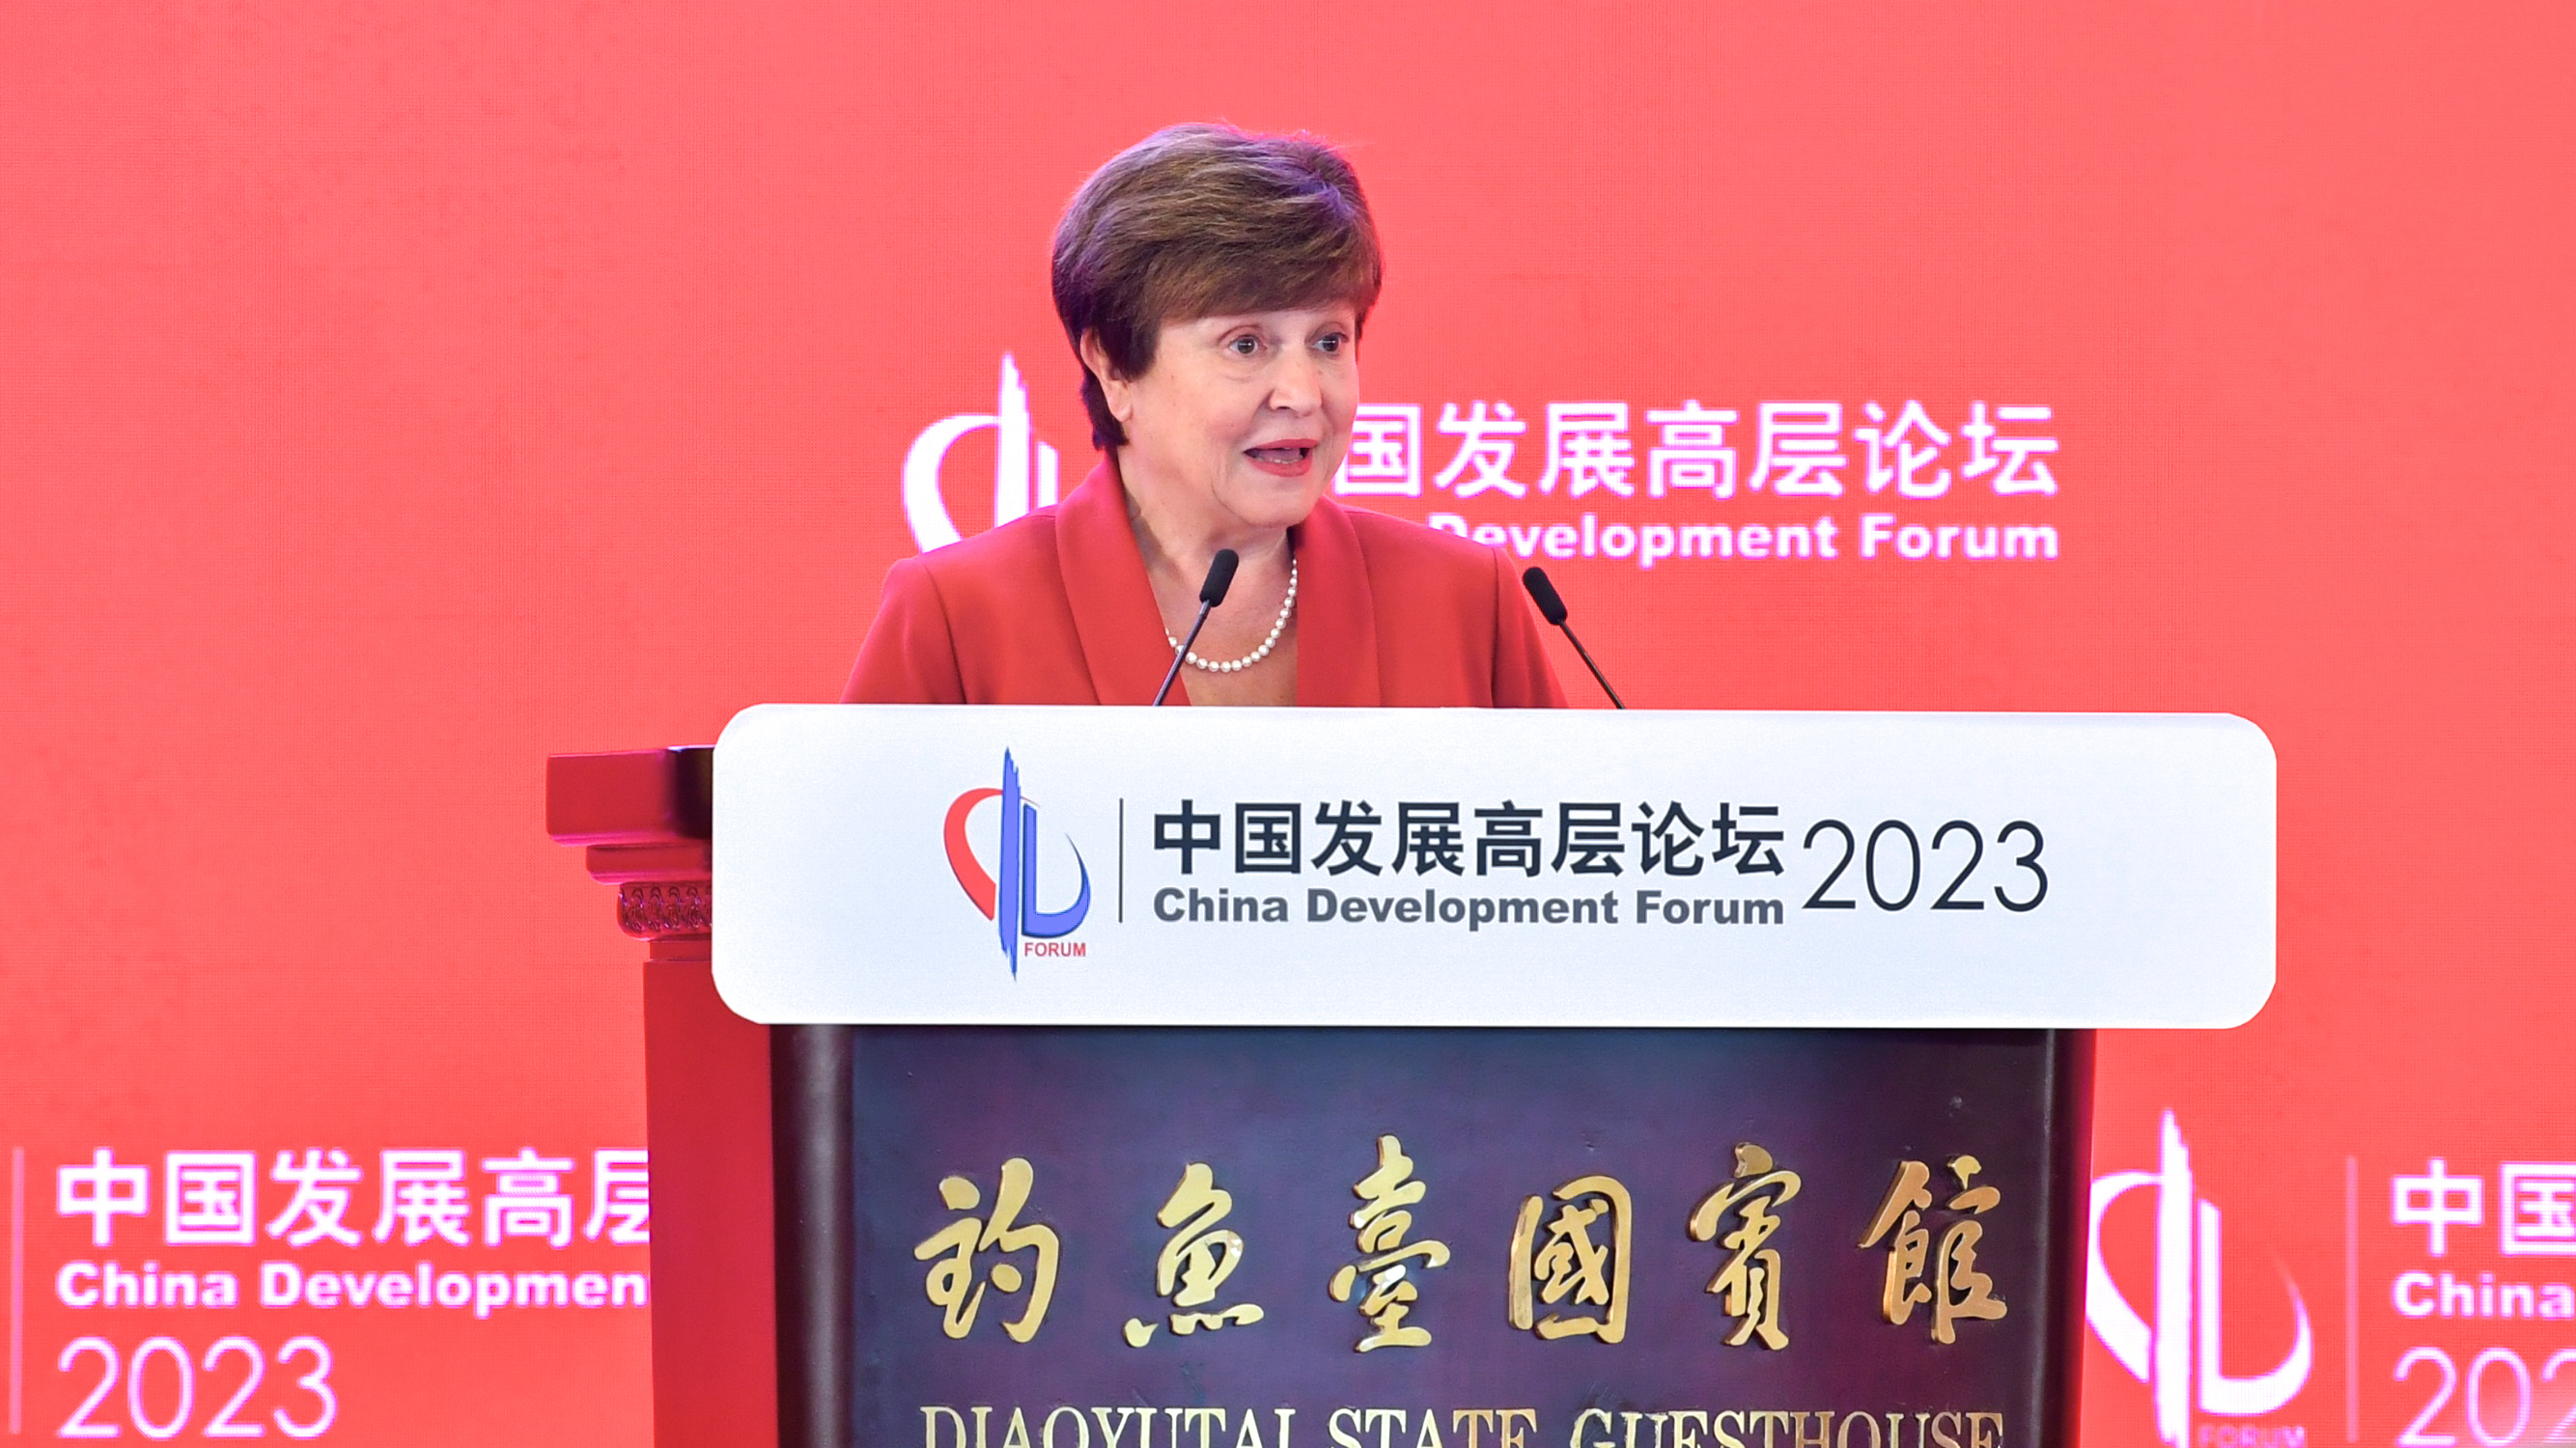 Kristalina Georgieva, managing director of the IMF, gives a speech at China Development Forum 2023 on March 26, 2023. /CFP